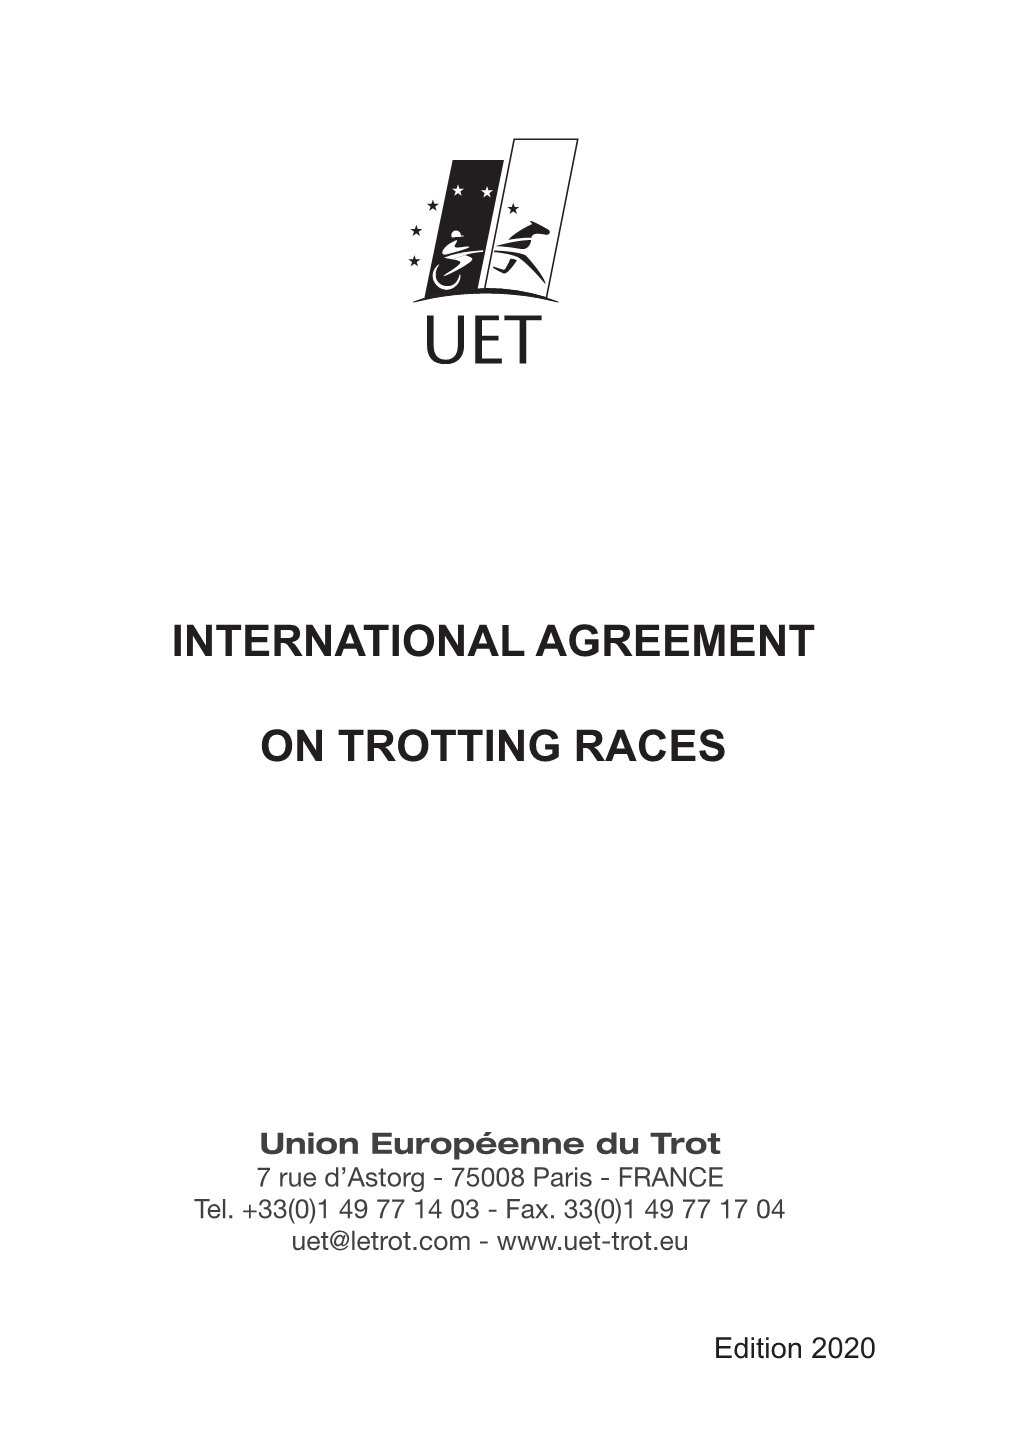 International Agreement on Trotting Races, in Particular by Ensuring That Said Agreement Is Incorporated Into Their National Regulations and to Put Forward Guidelines